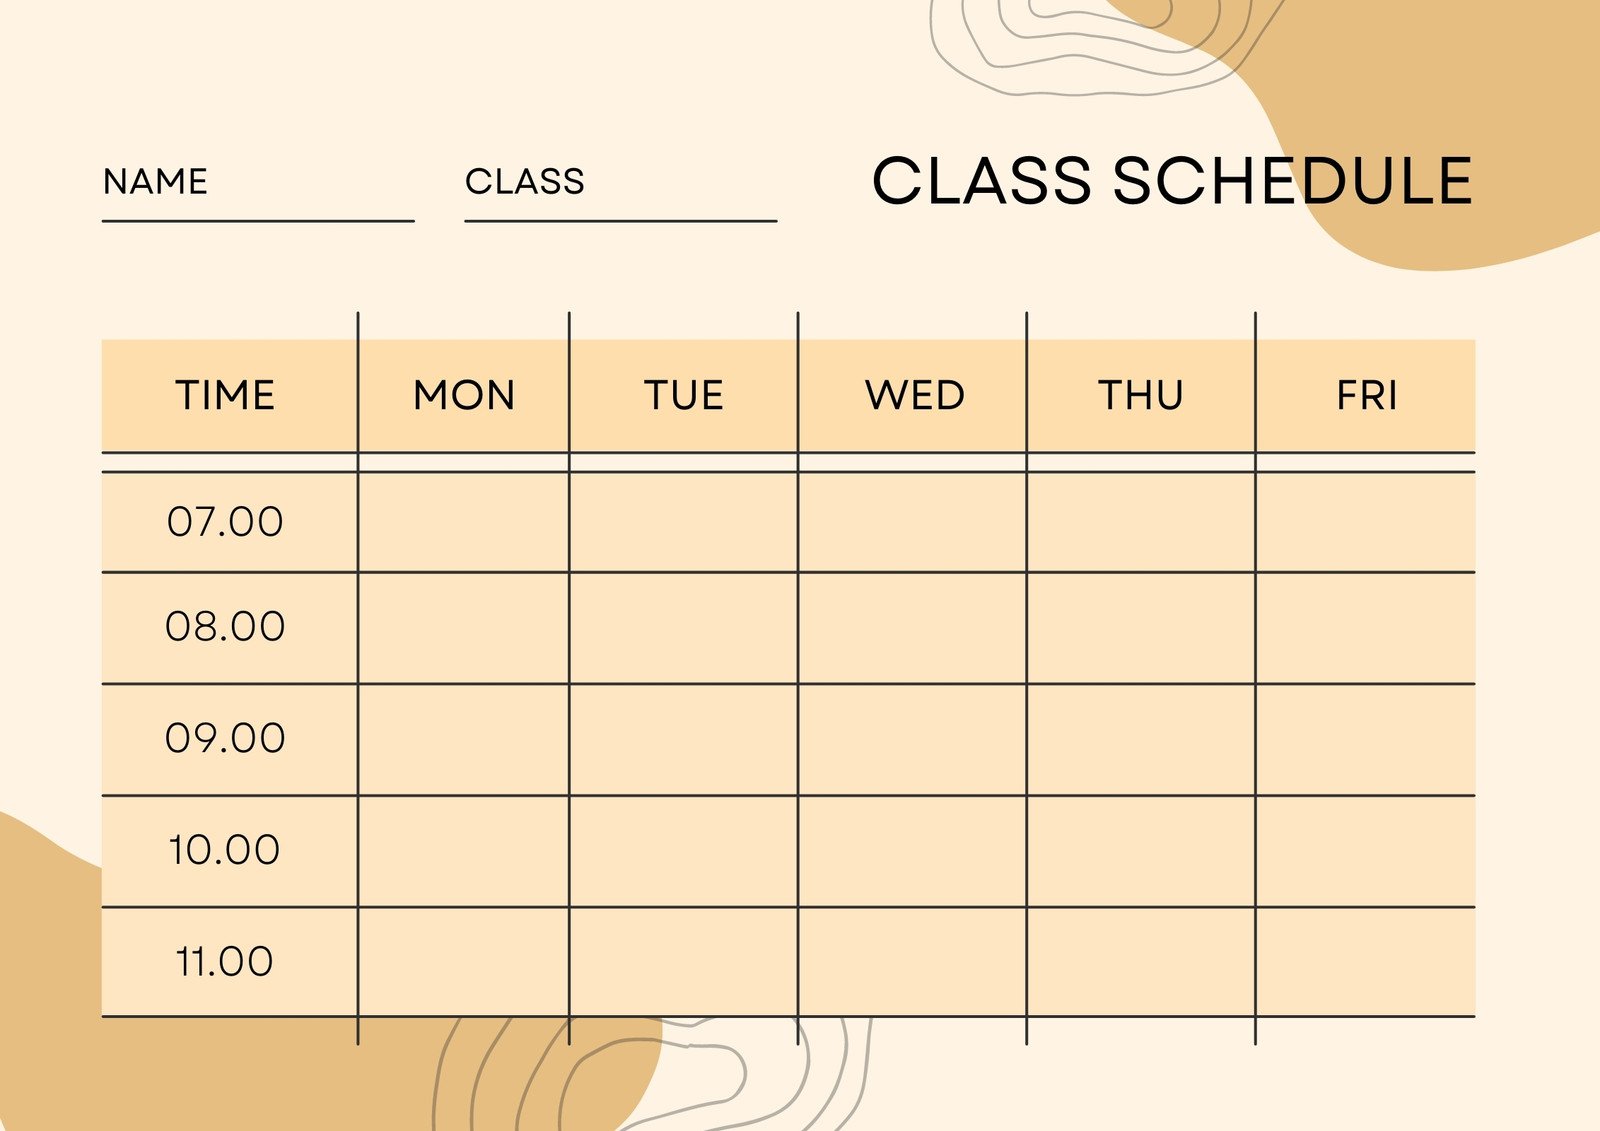 free-printable-class-schedule-templates-to-customize-canva-free-blank